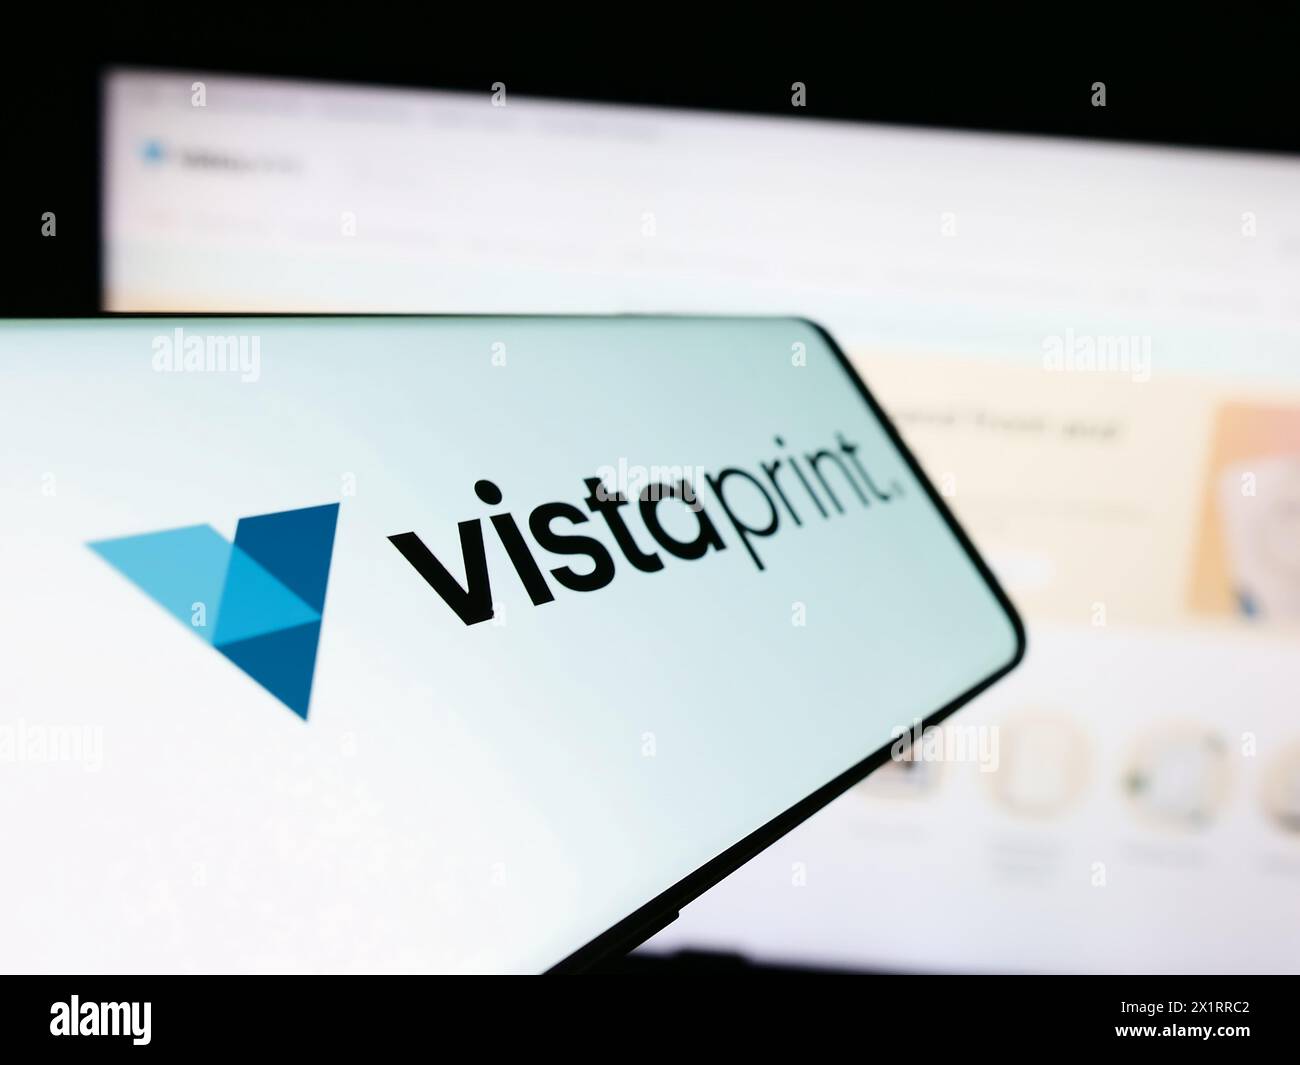 Mobile phone with logo of mass customization company VistaPrint (Vista) in front of business website. Focus on center-left of phone display. Stock Photo